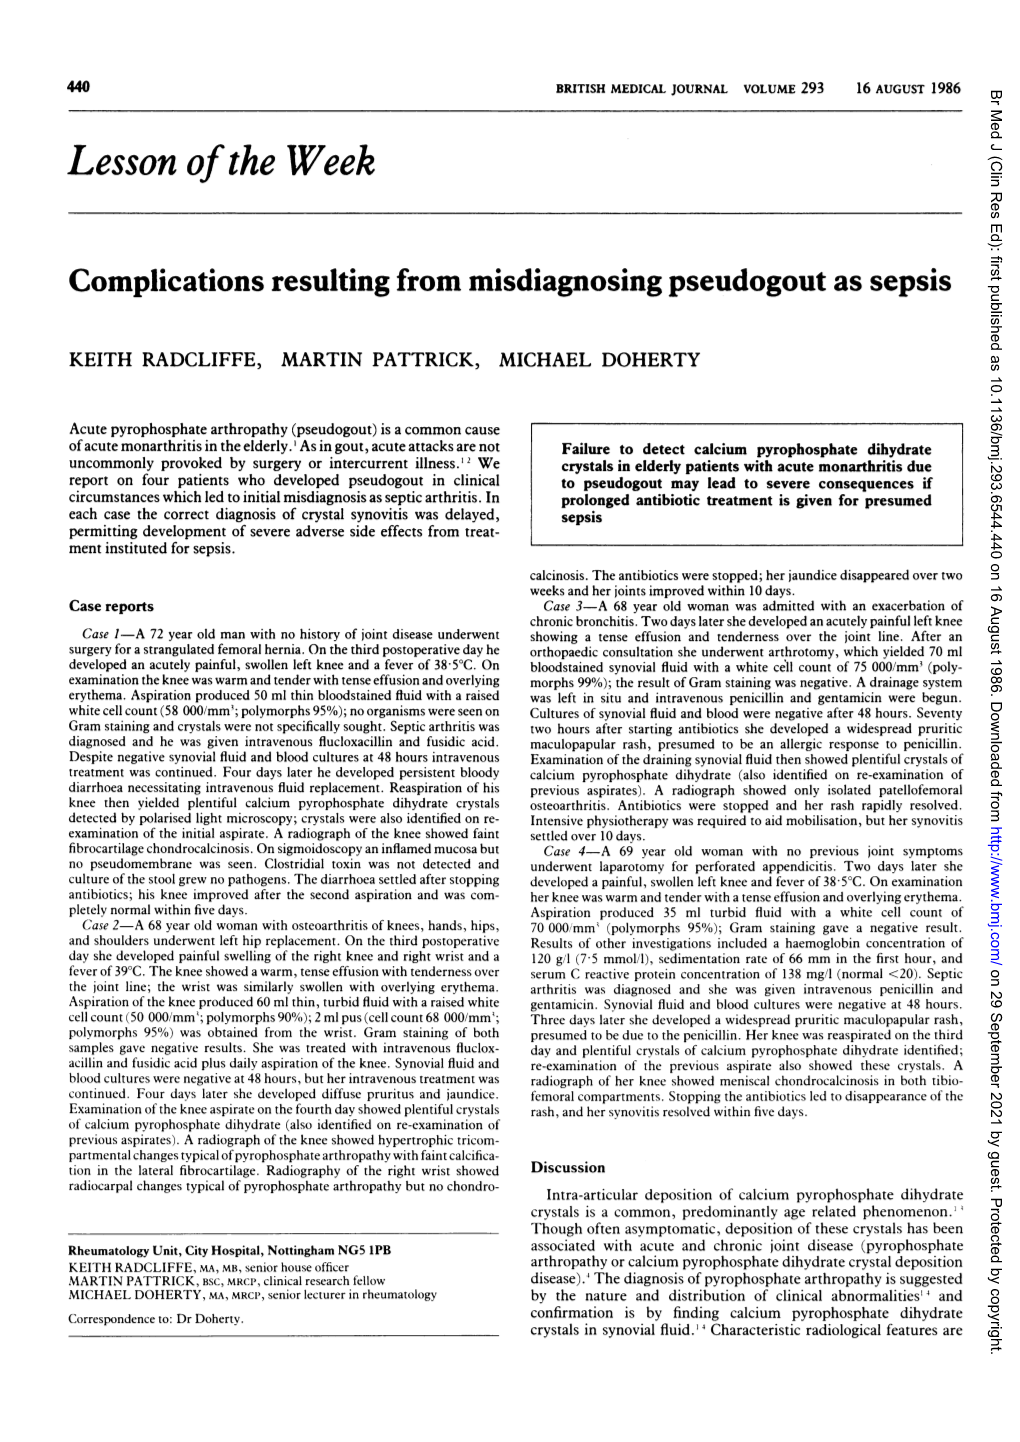 Complications Resulting from Misdiagnosing Pseudogout As Sepsis